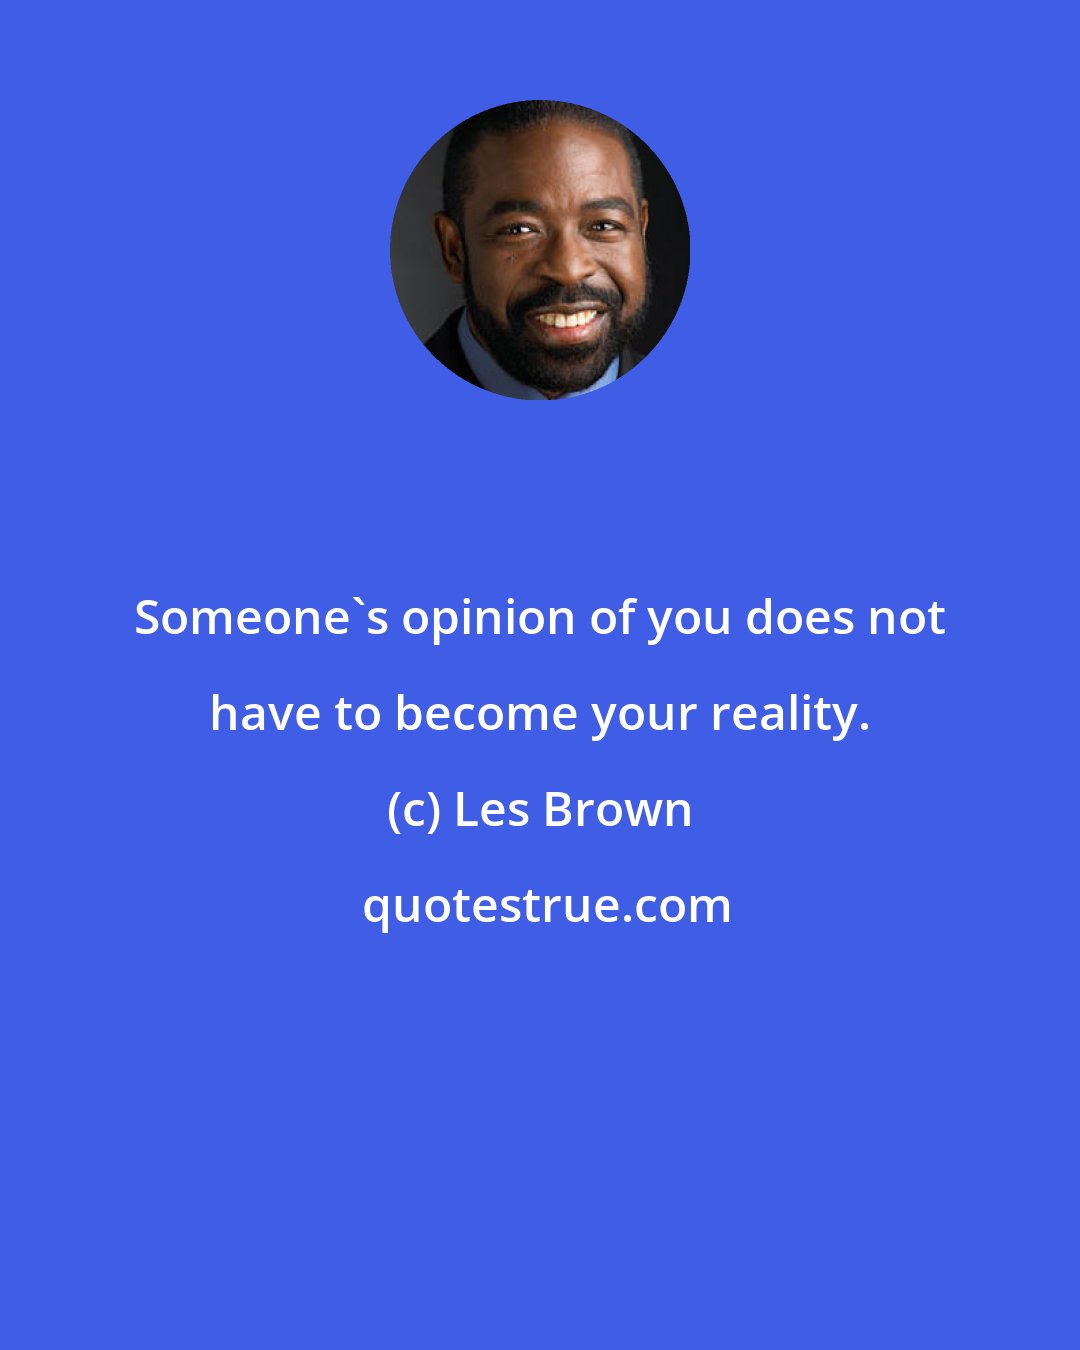 Les Brown: Someone's opinion of you does not have to become your reality.